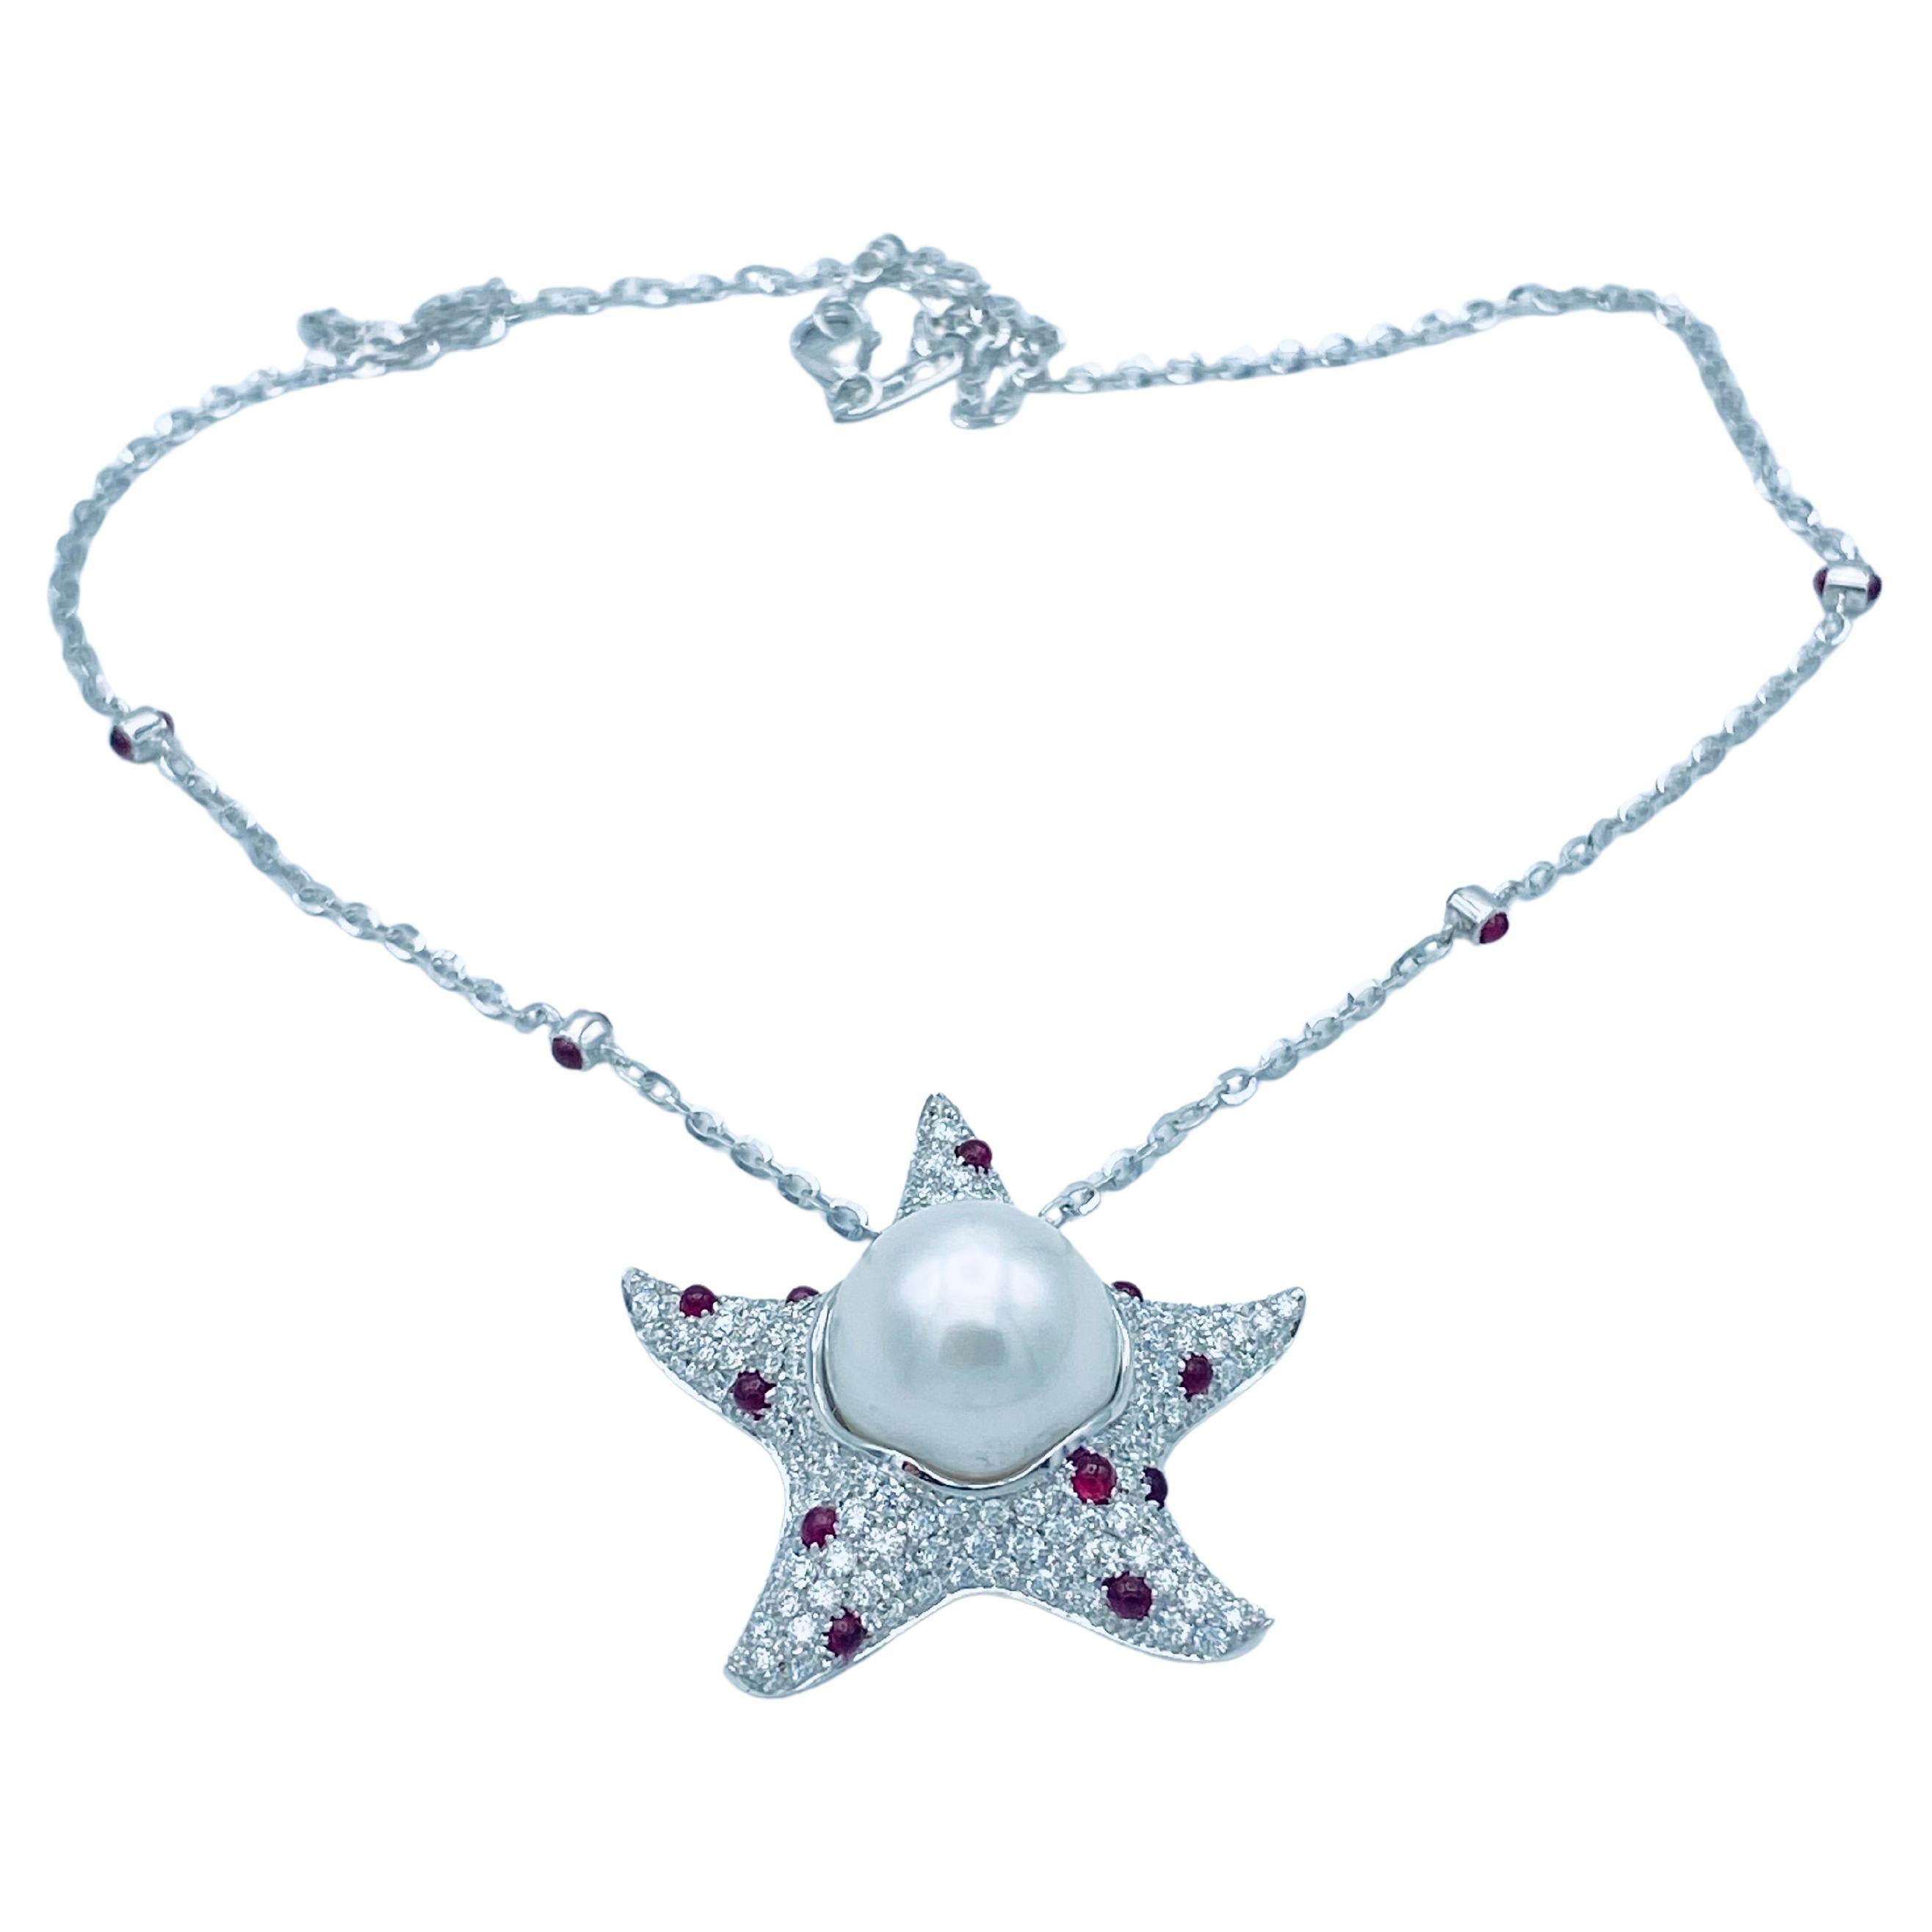 Starfish White Diamond Ruby Australian Pearl 18Kt Gold Pendant/Necklace Made in Italy
This pendant is a starfish covered by many white diamonds, thirteen rubies cabochon cut and an Australian pearl complete the shape giving it lots of volume.
It has